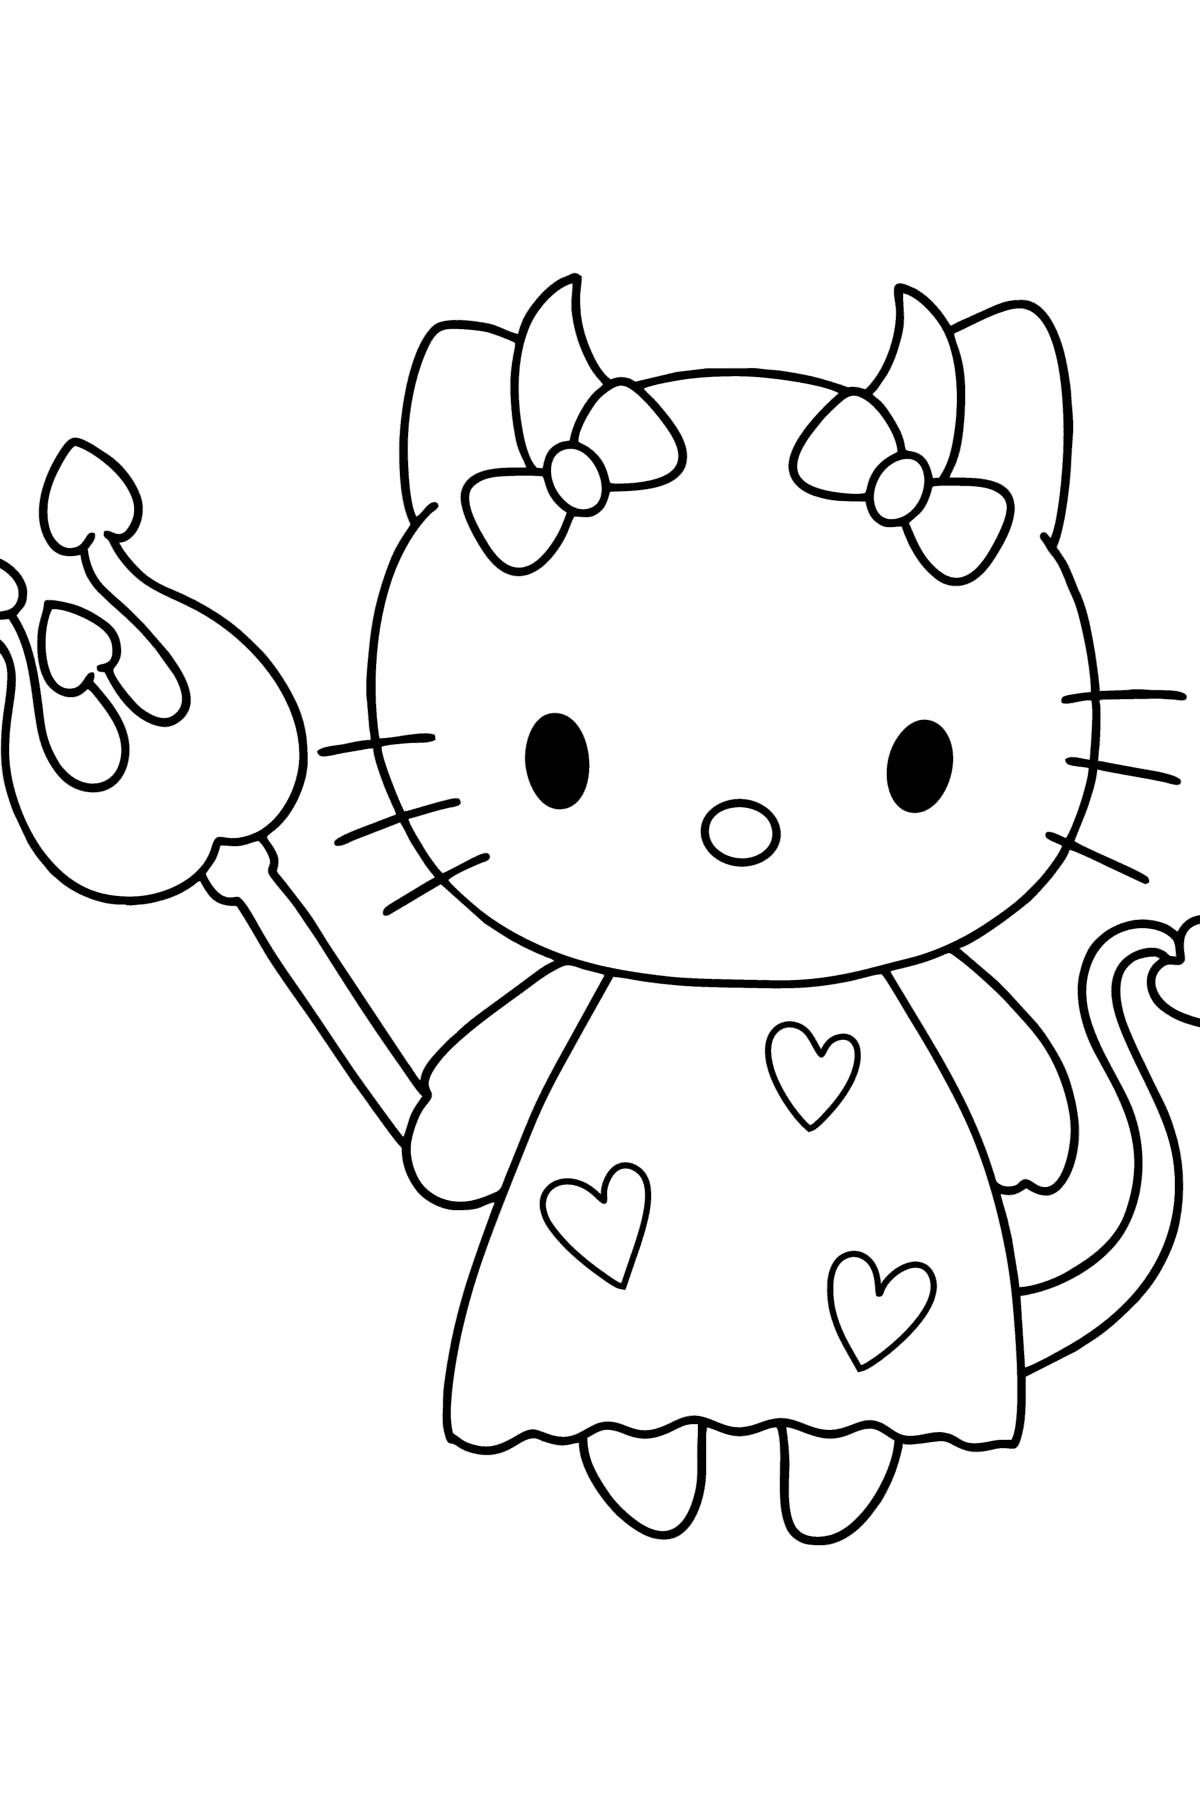 Hello Kitty Devil coloring page - Coloring Pages for Kids